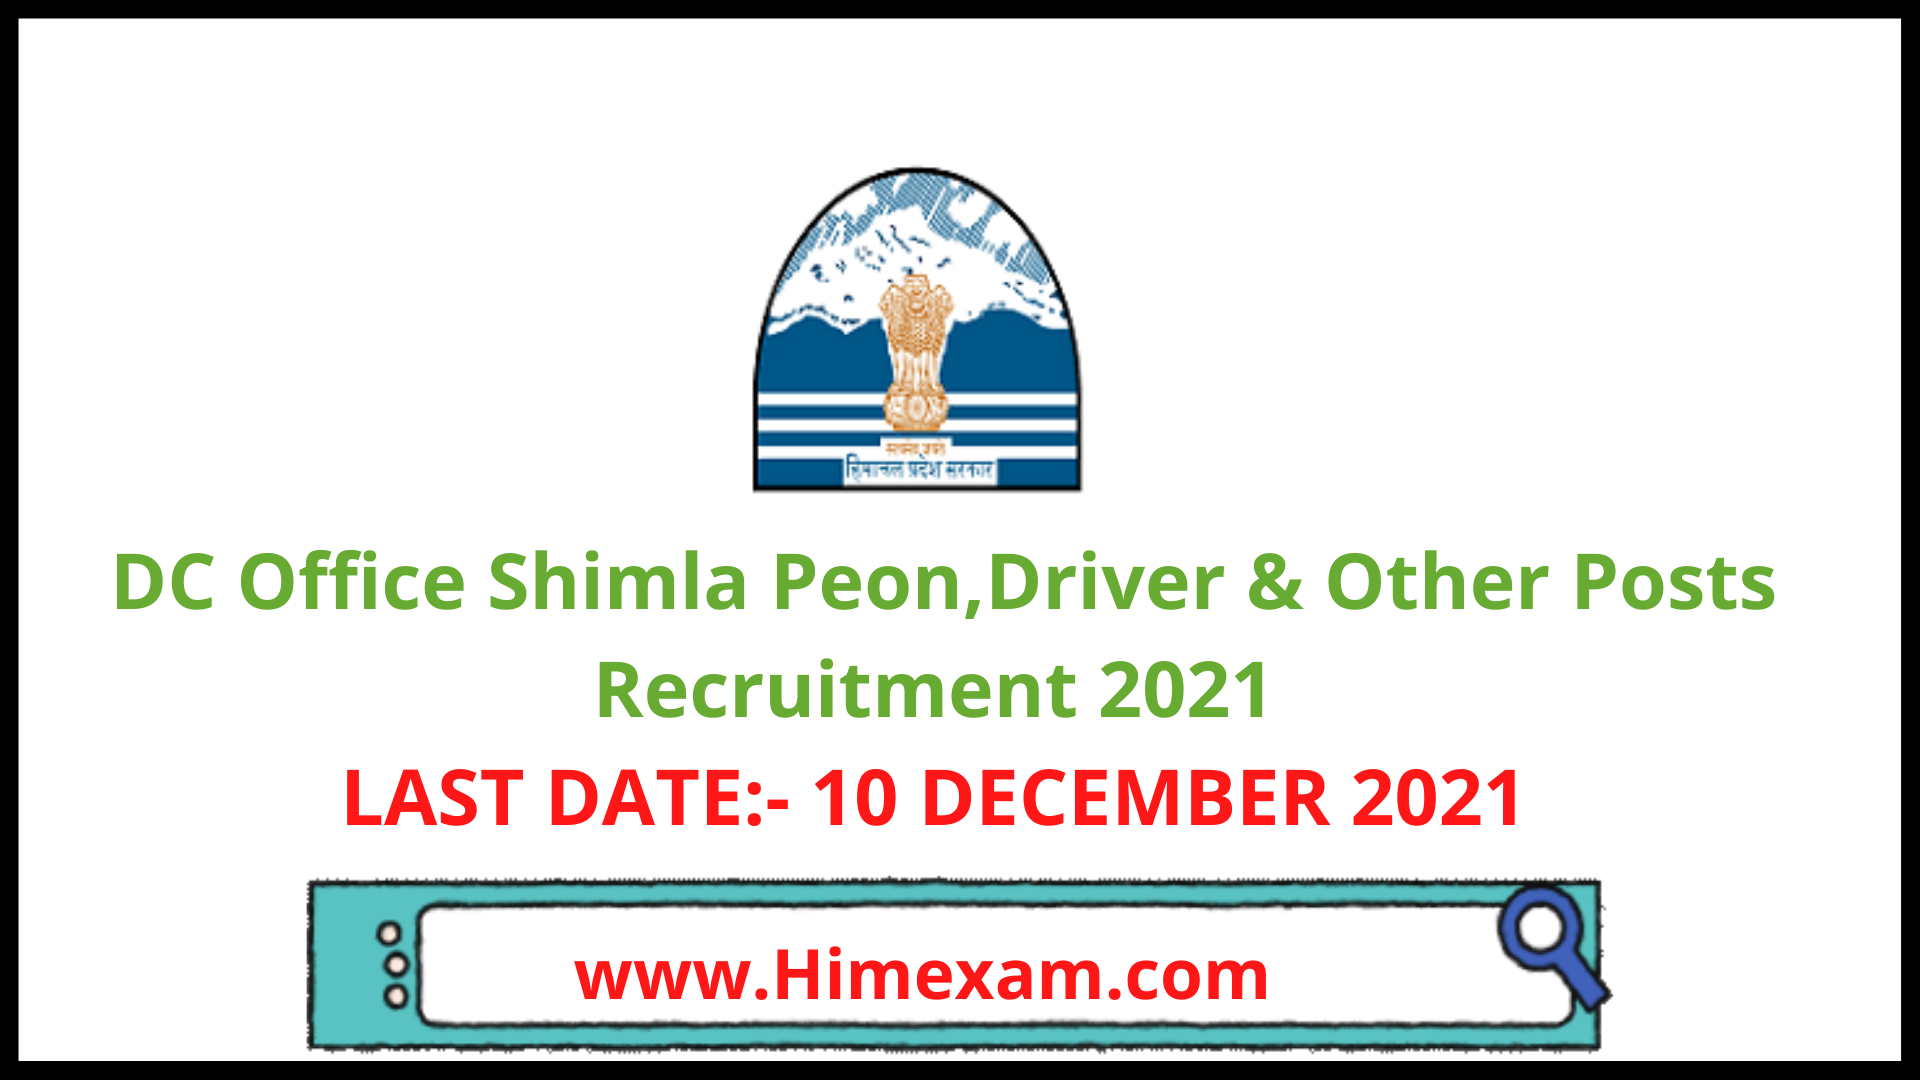 DC Office Shimla Peon,Driver & Other Posts Recruitment 2021